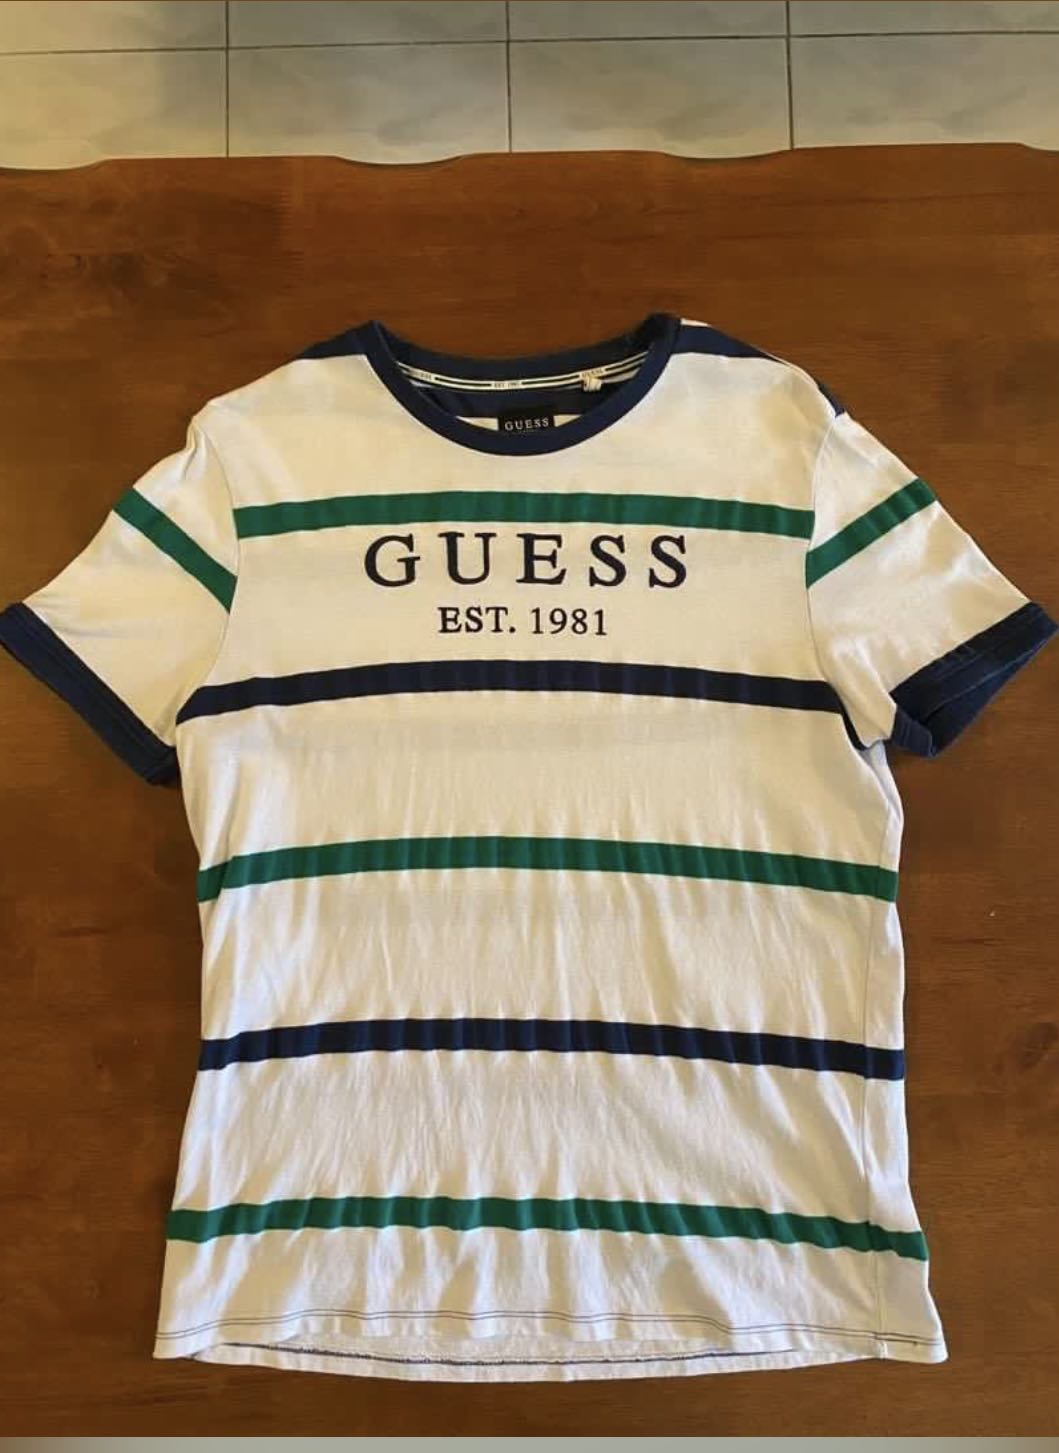 Buy Guess Oxford Shirt Online In India India, 53% OFF